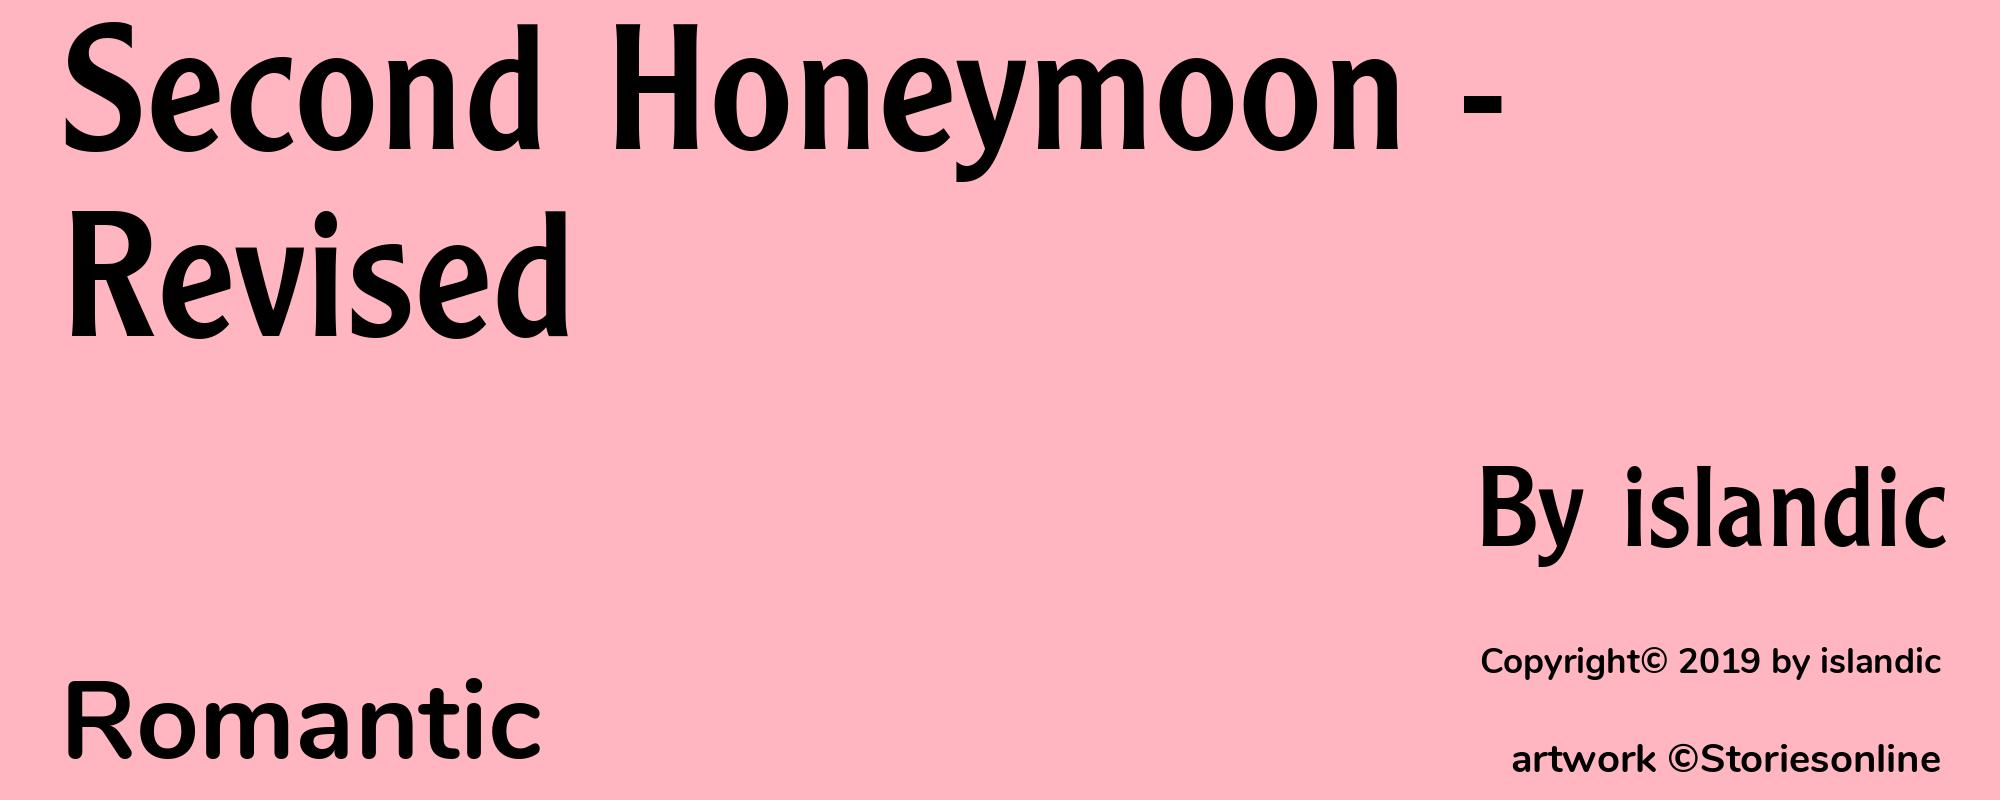 Second Honeymoon - Revised - Cover